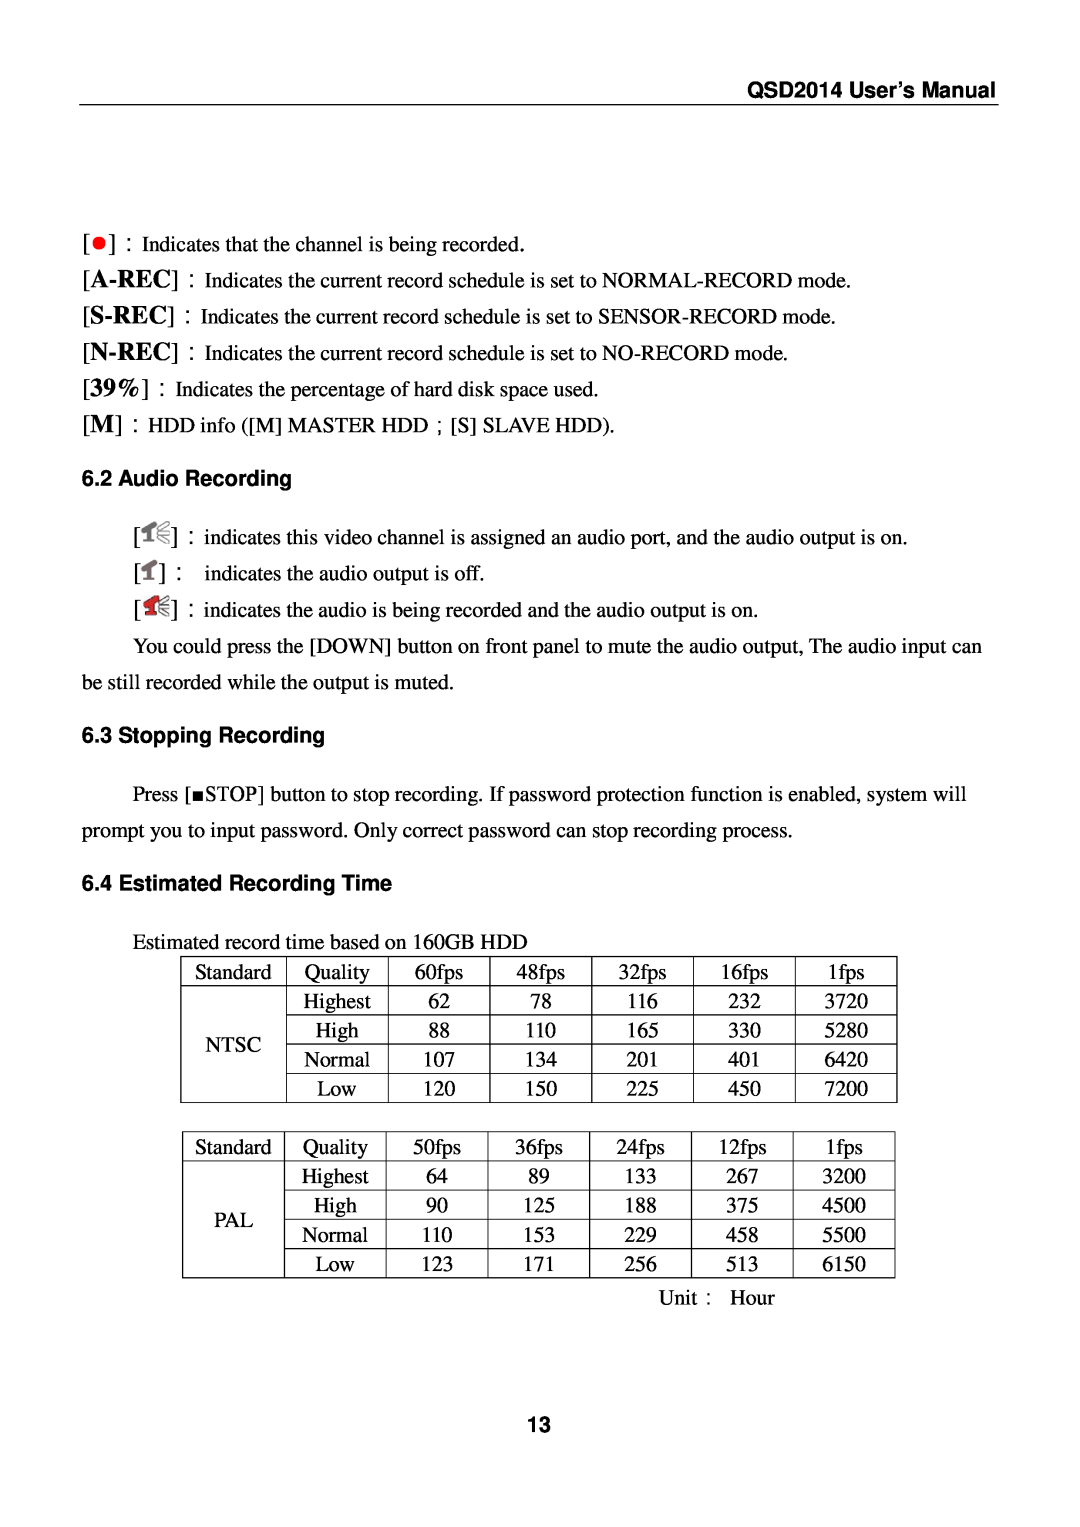 Q-See user manual Audio Recording, Stopping Recording, Estimated Recording Time, QSD2014 User’s Manual 